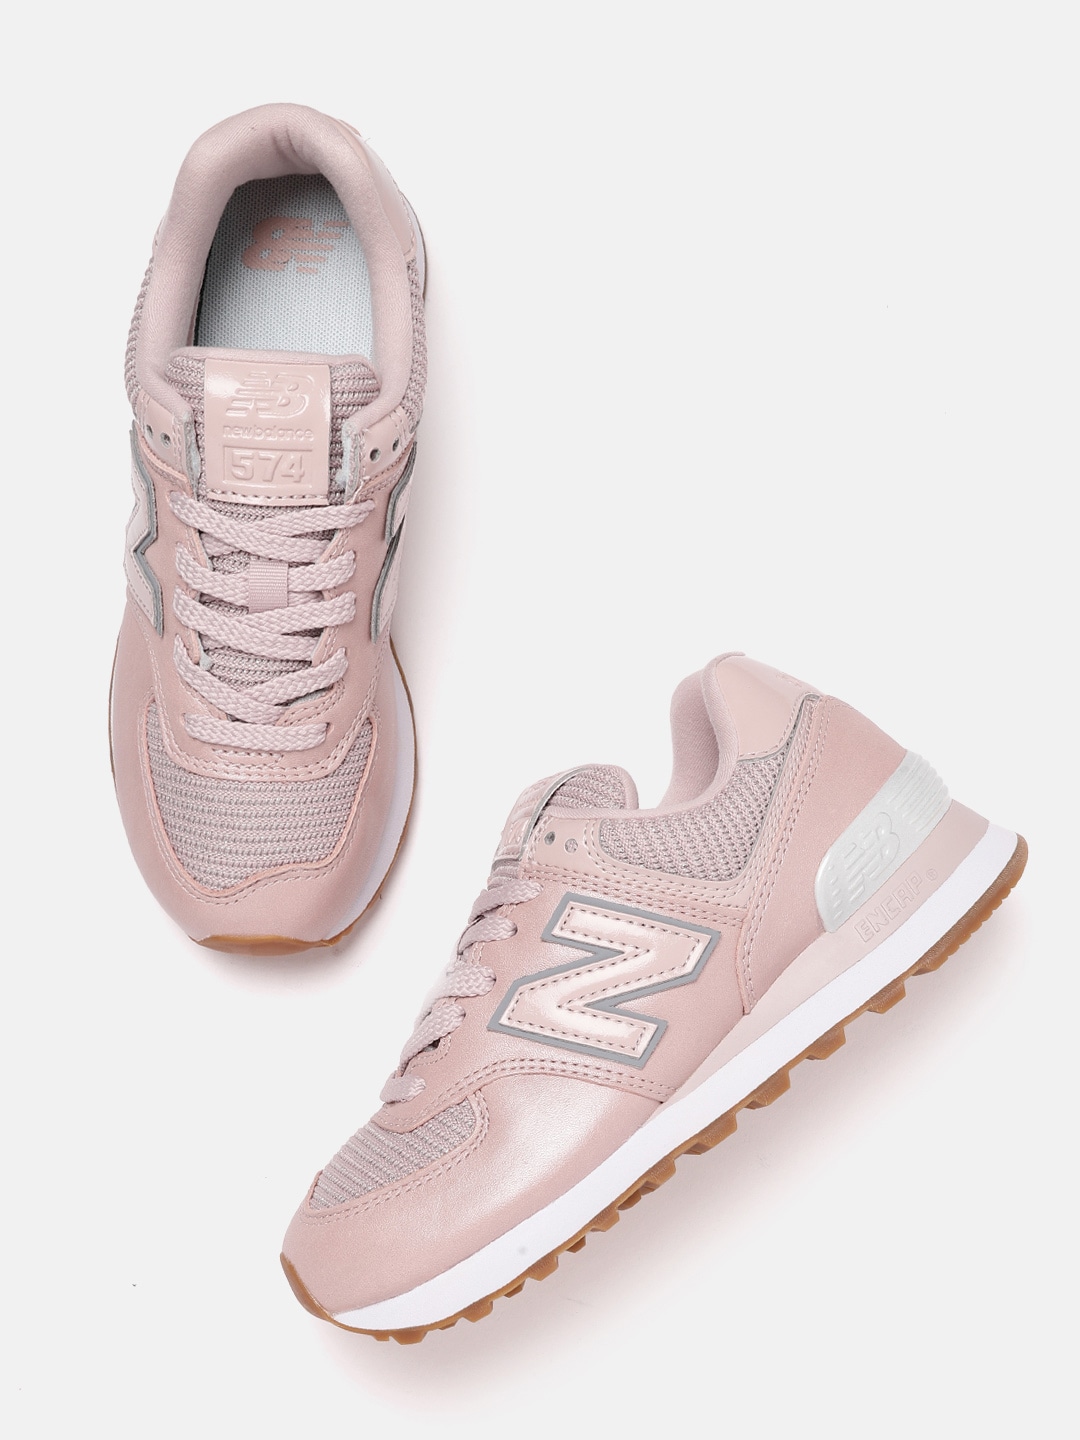 New Balance Women Pink Woven Design Sneakers Price in India